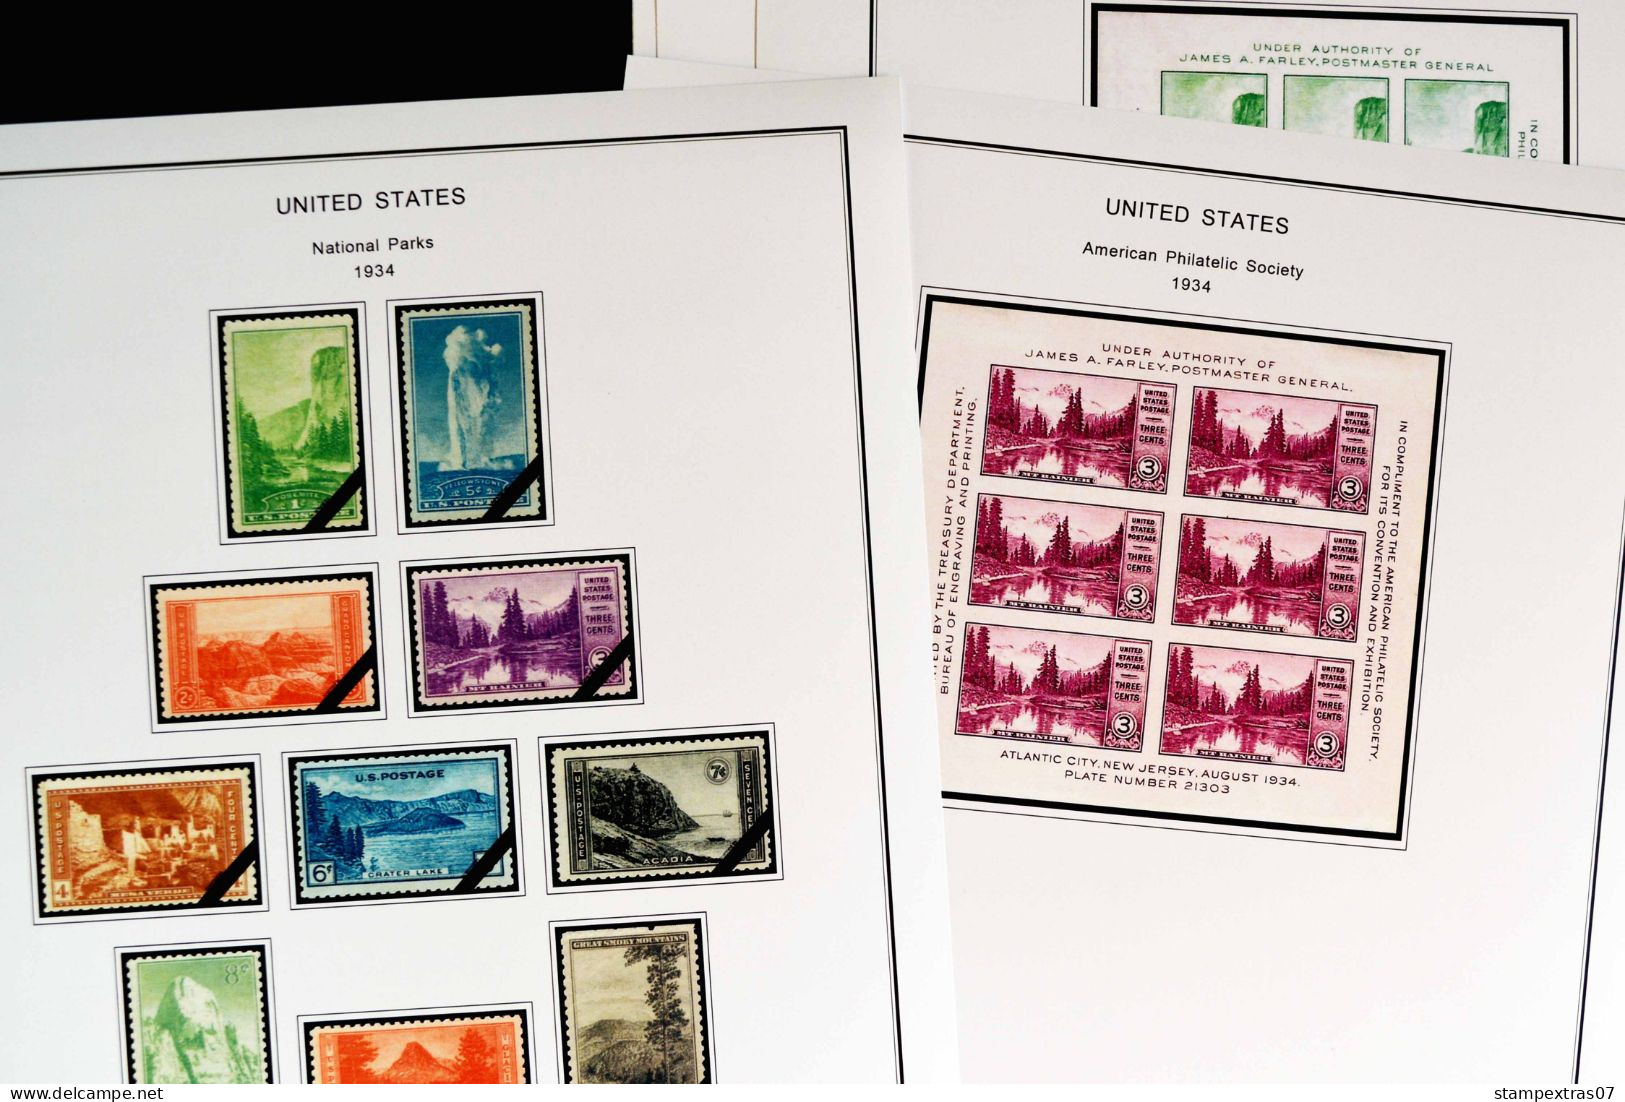 COLOR PRINTED USA 1920-1965 STAMP ALBUM PAGES (66 illustrated pages) >> FEUILLES ALBUM